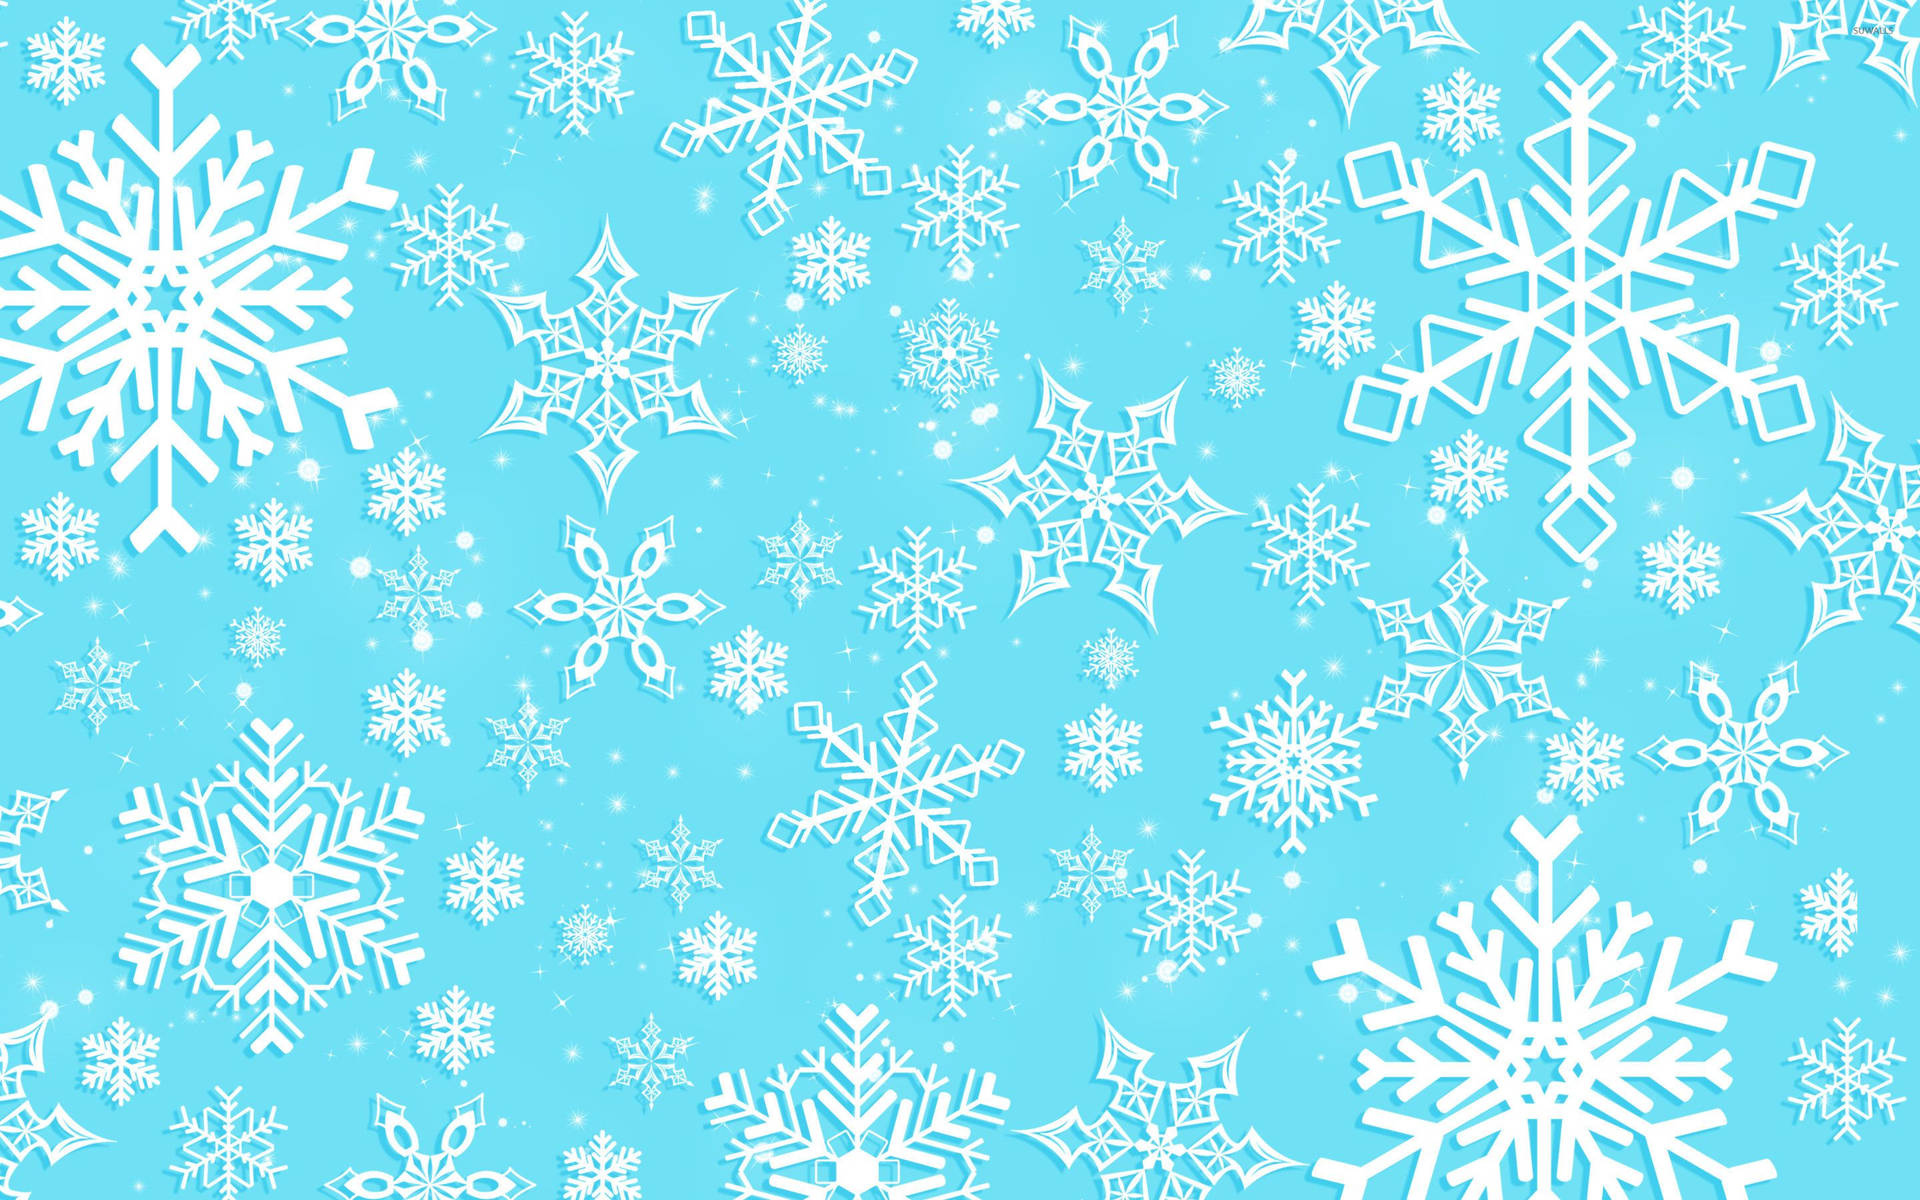 Snowflake Photos Download The BEST Free Snowflake Stock Photos  HD Images